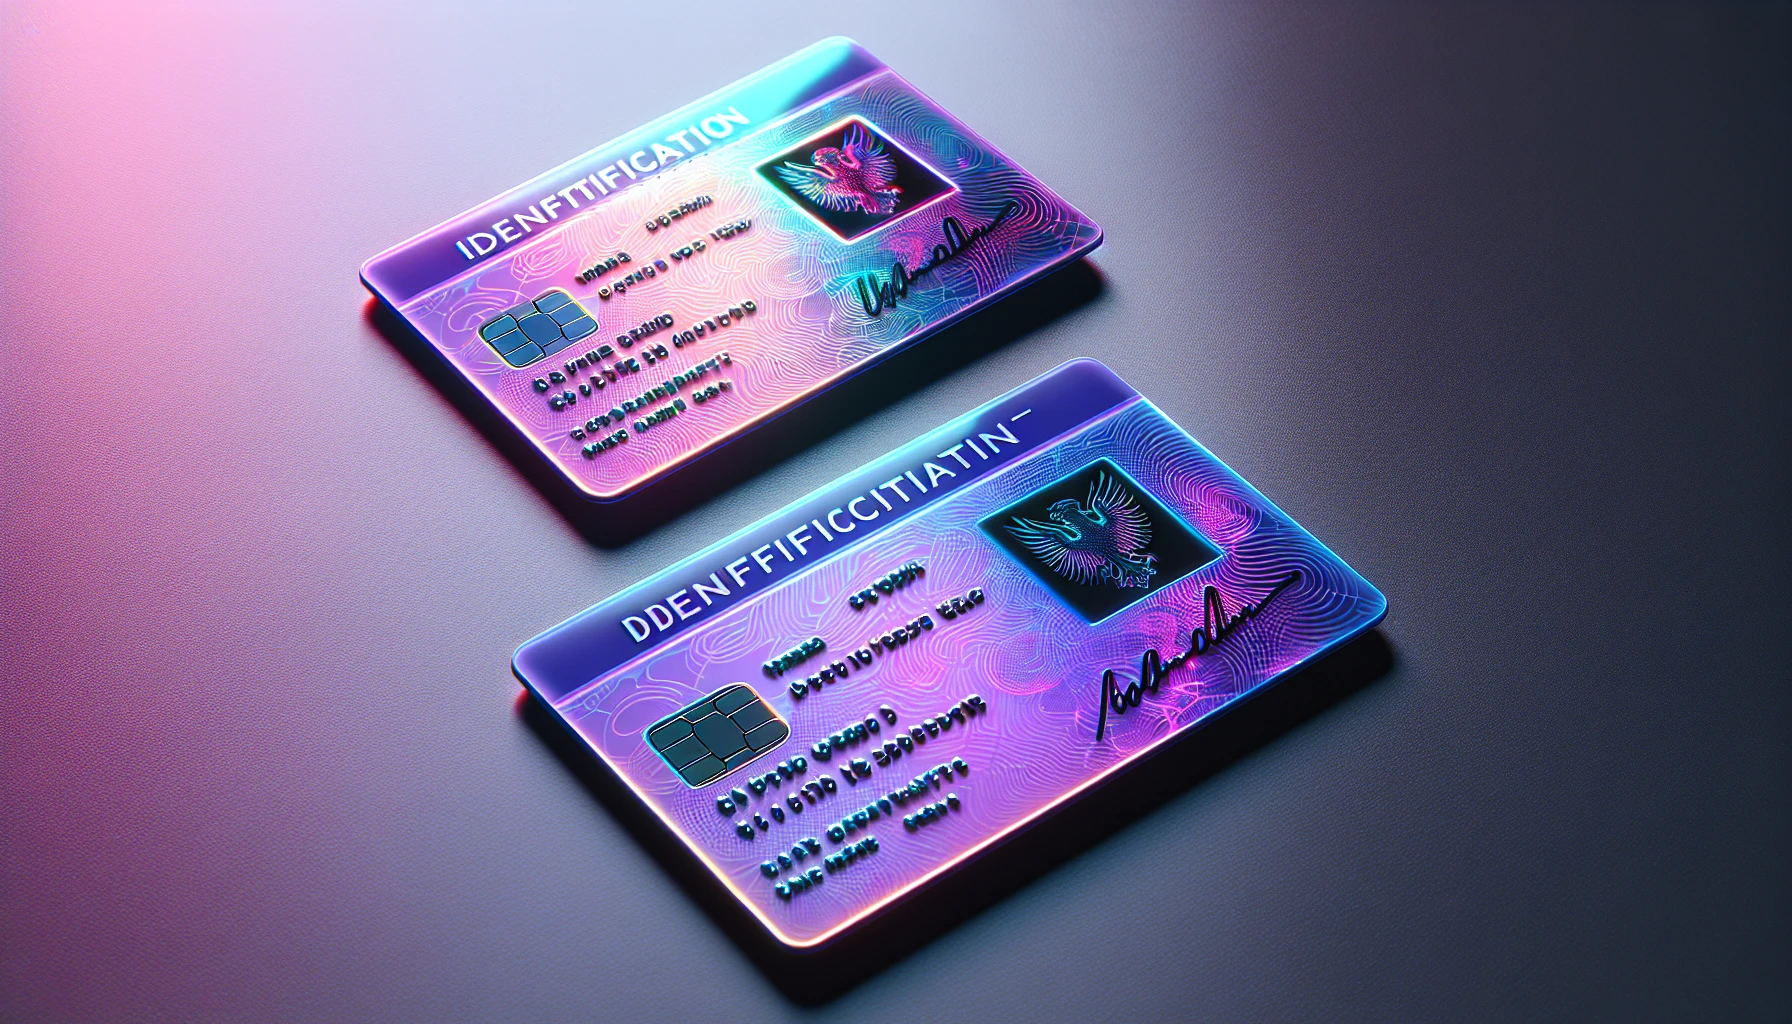 Comparing security features on real and fake identification cards